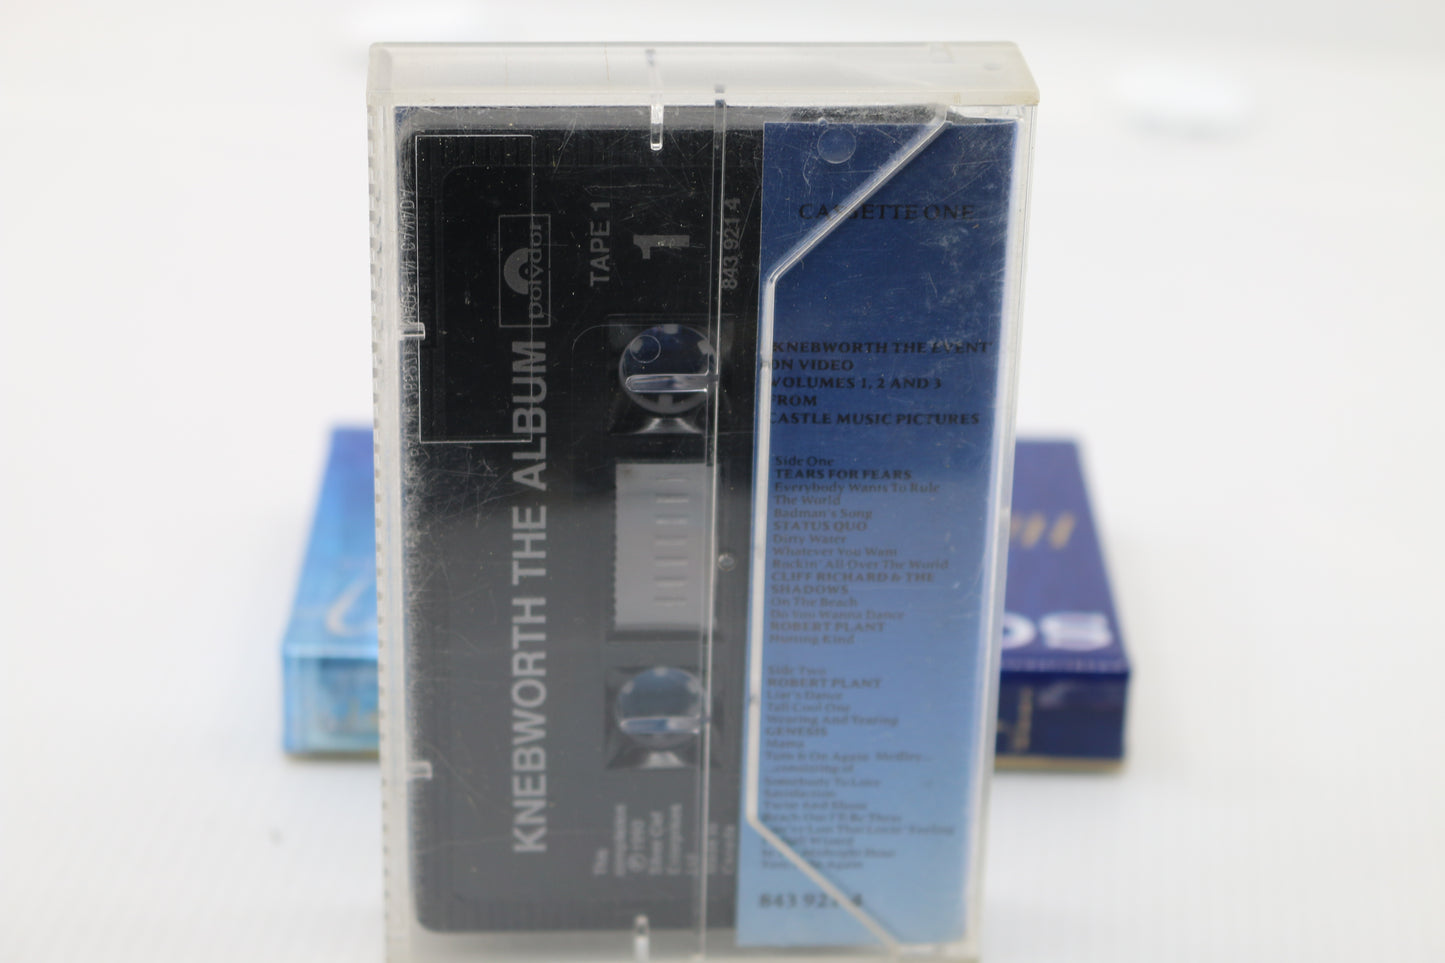 Vintage music show cassette knebworth the album by polydor